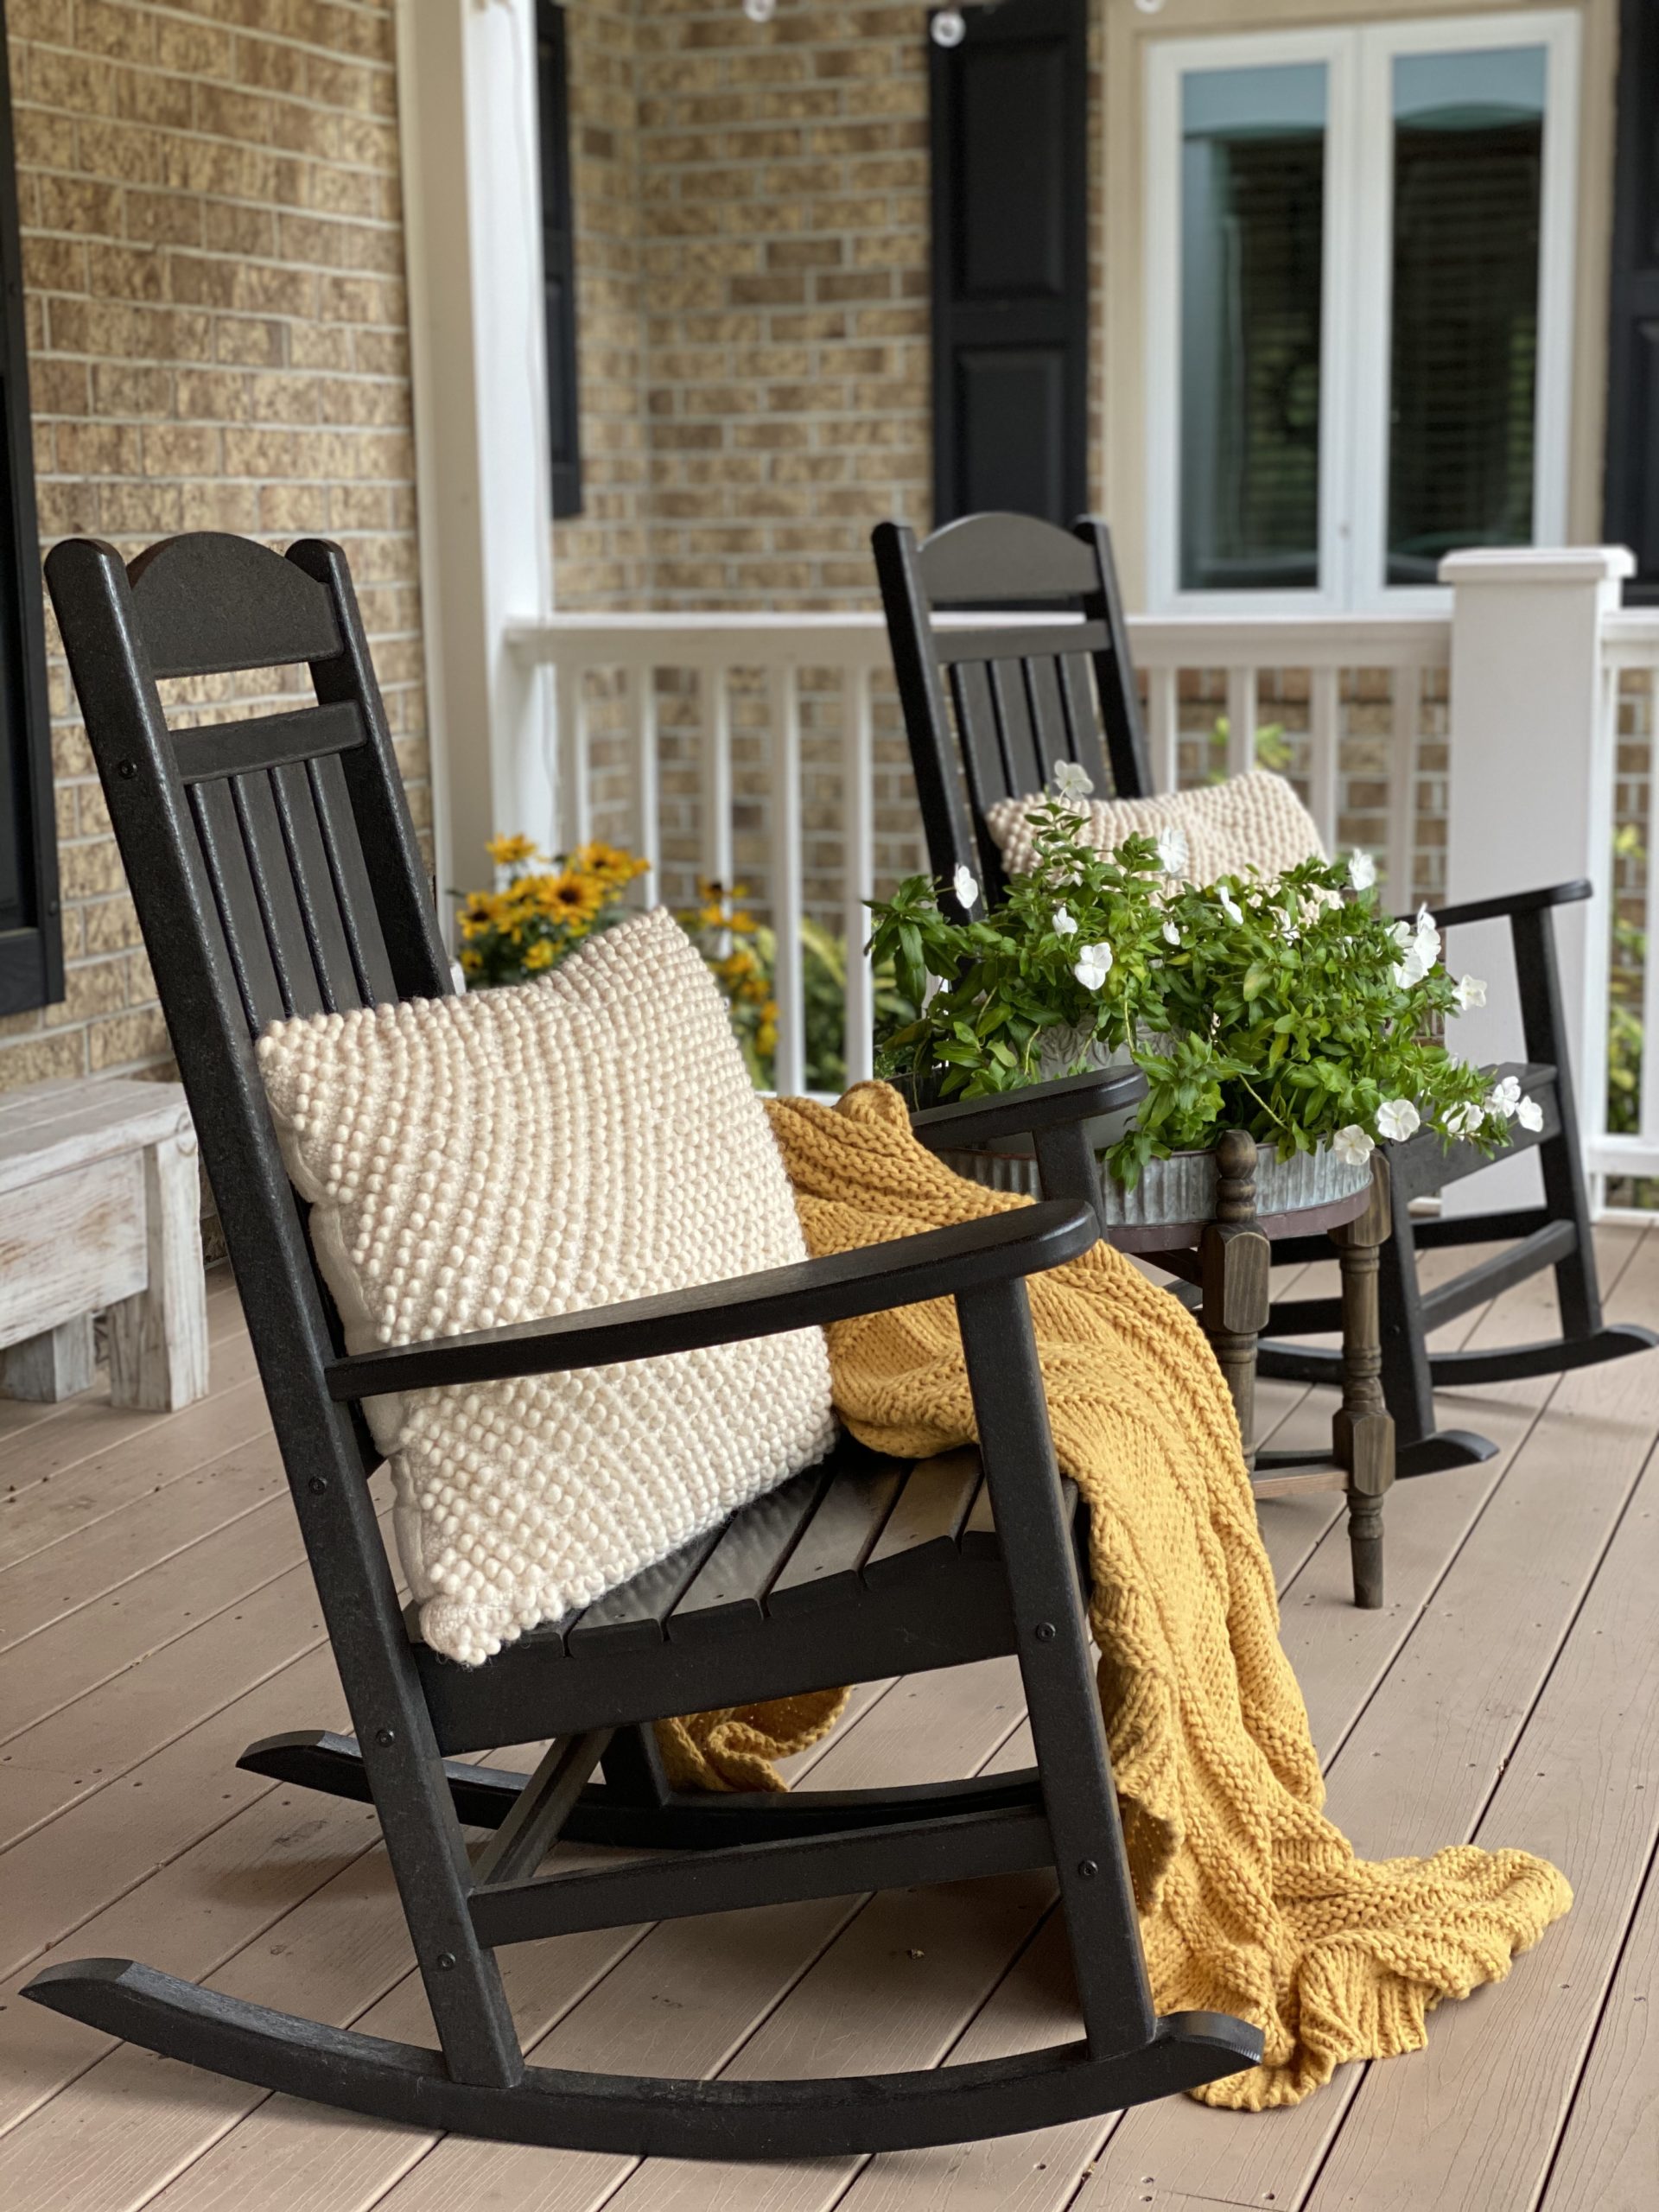 Front porch with black rocking chairs and a mustard yellow blanket, coat cream pillows and flowers.